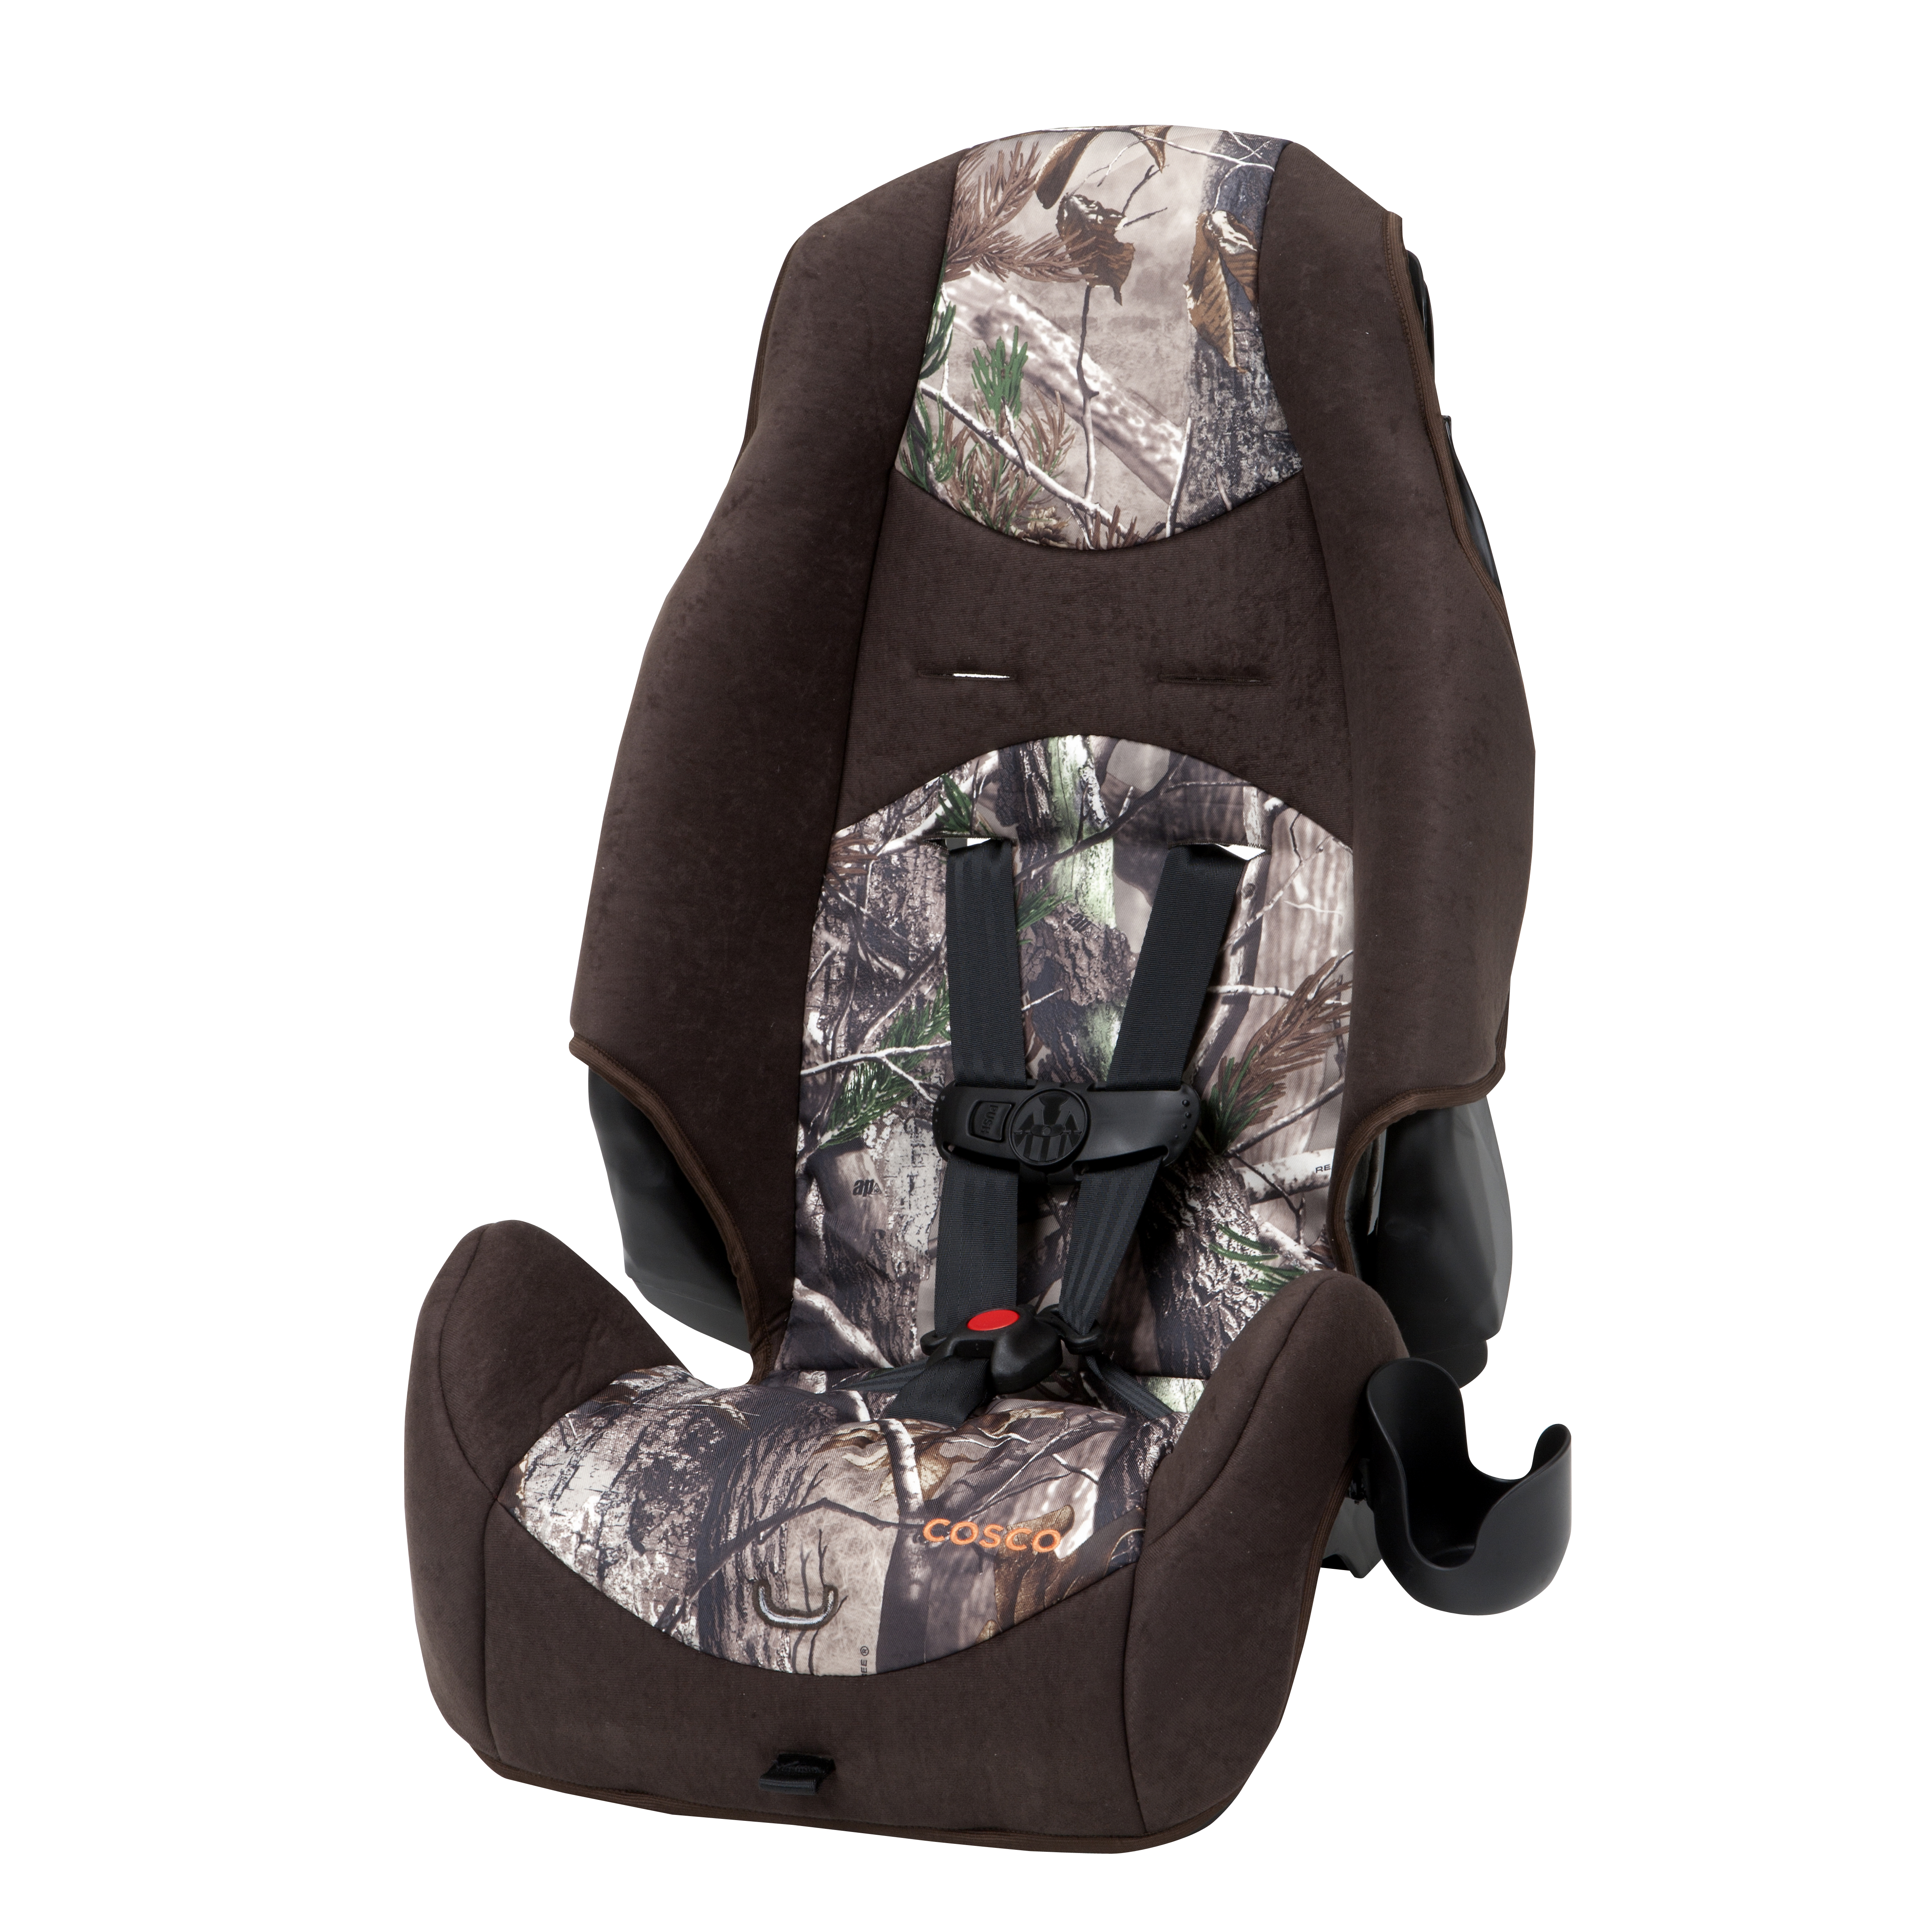 Highback 2 in 1 Booster Car Sear - Realtree